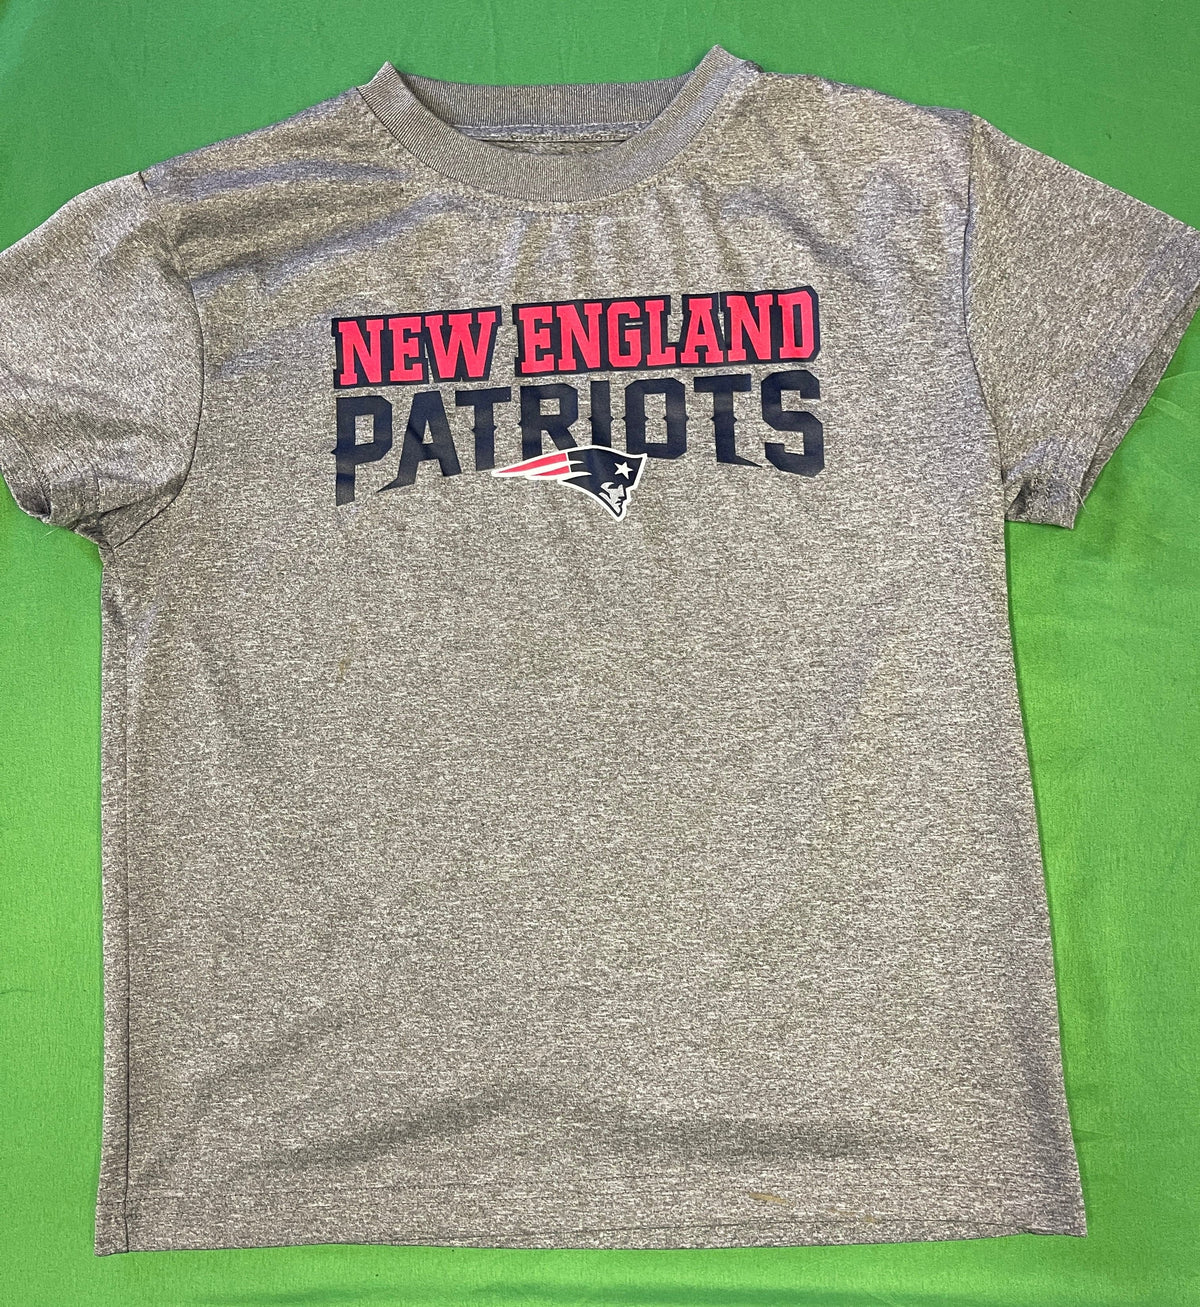 NFL New England Patriots Heathered Grey T-Shirt Youth Small 6-7